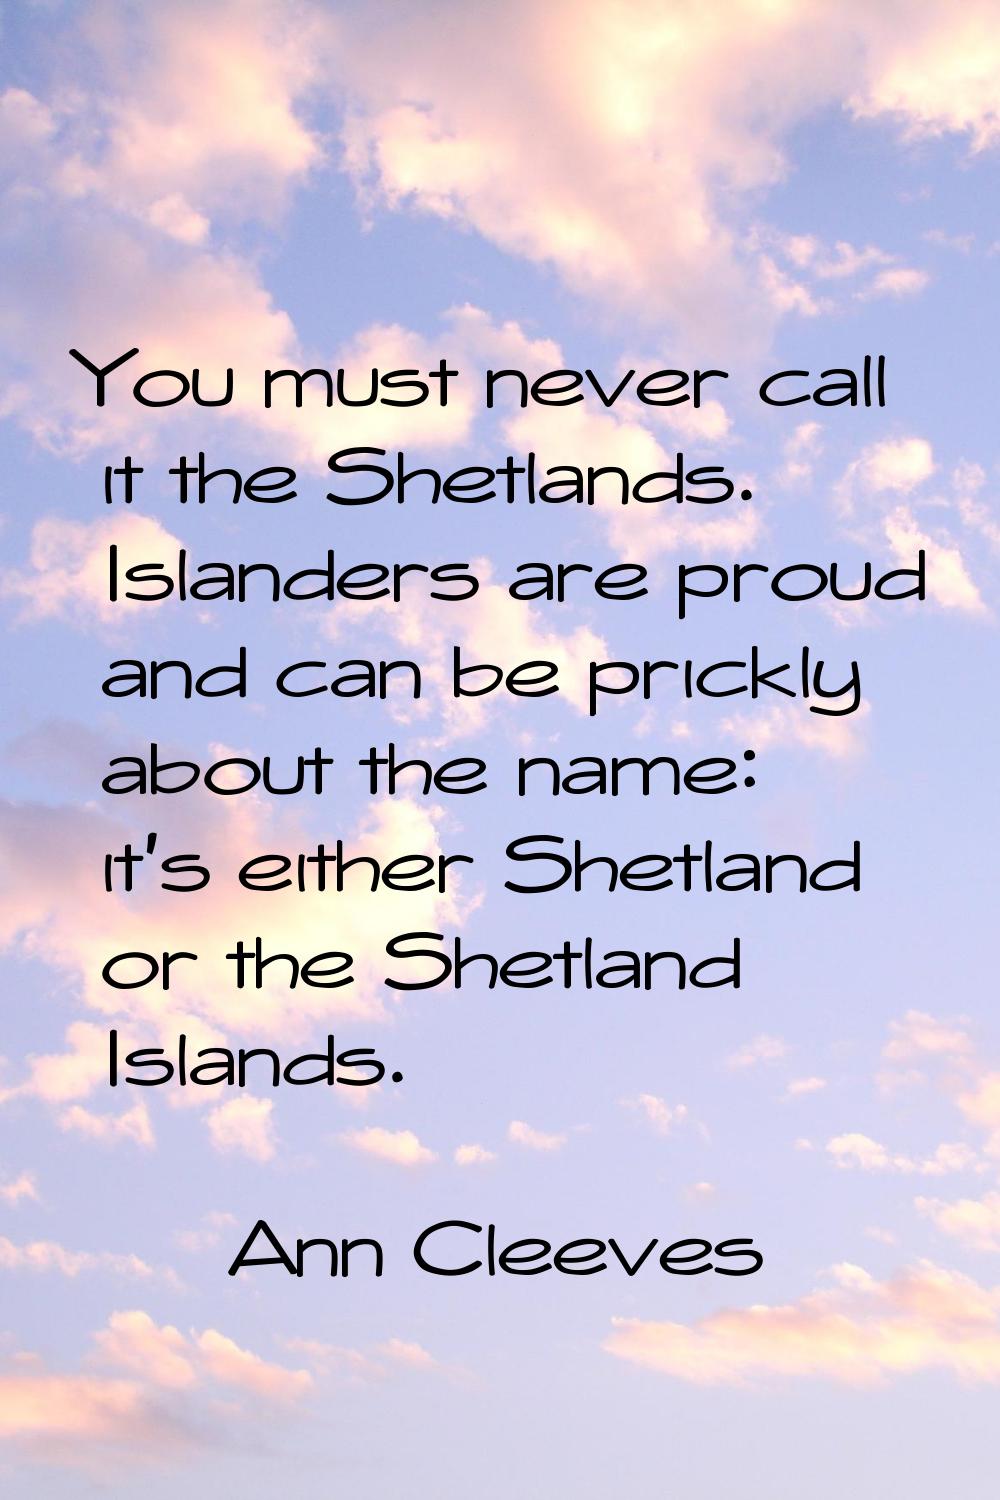 You must never call it the Shetlands. Islanders are proud and can be prickly about the name: it's e